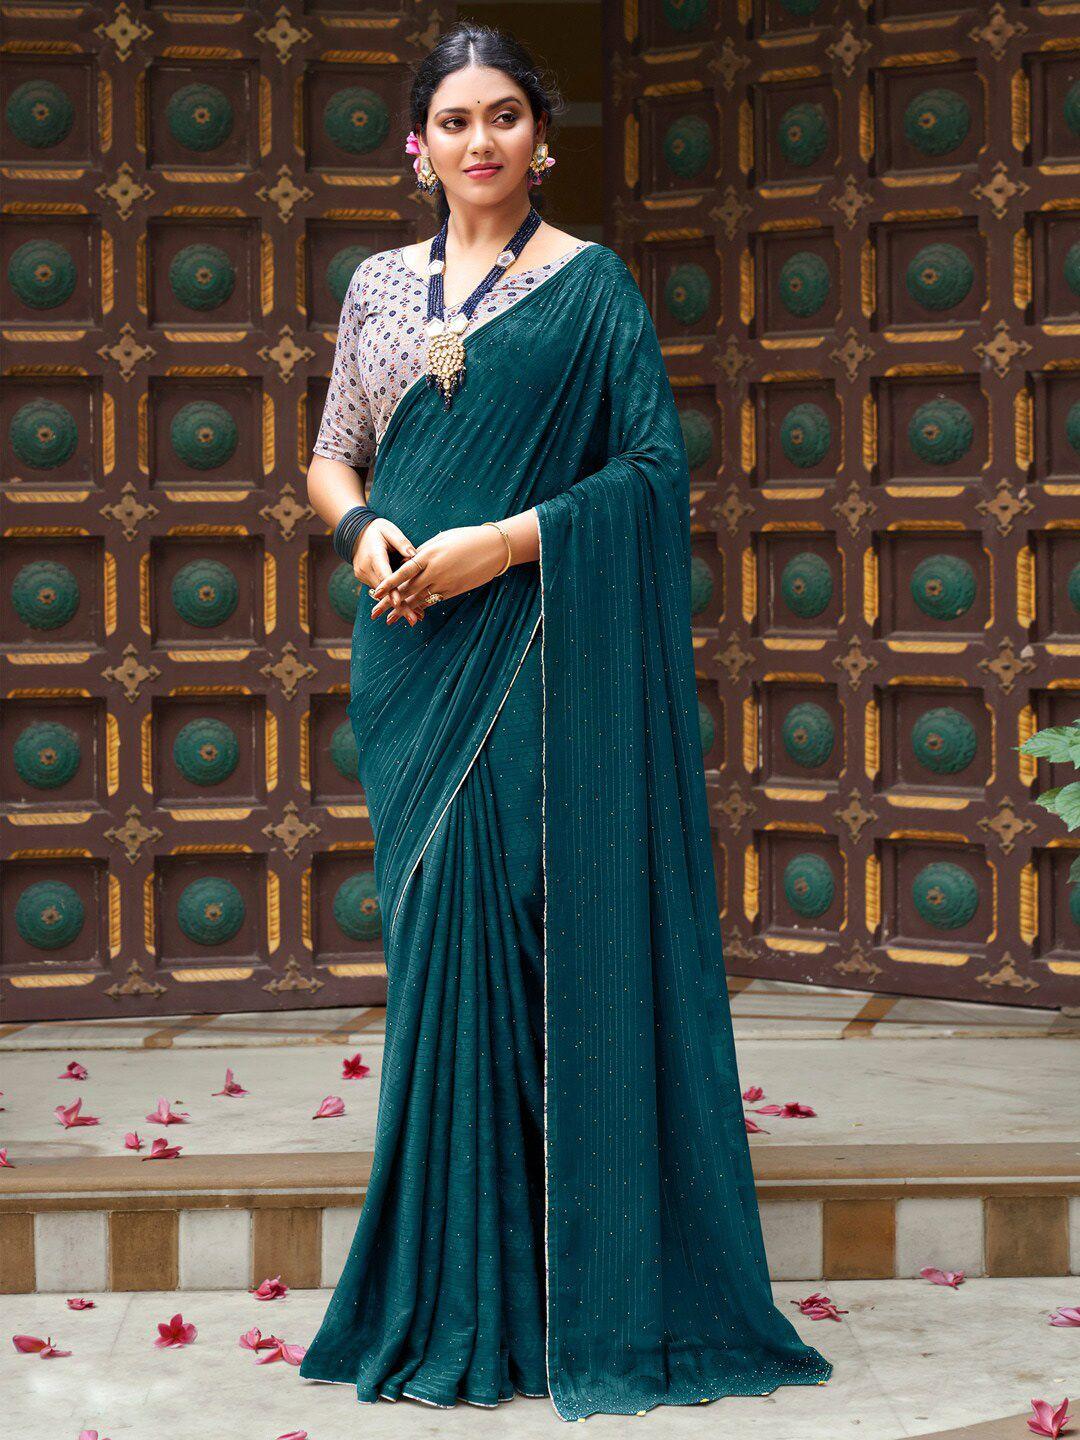 saree mall teal & white embellished beads and stones pure georgette sarees